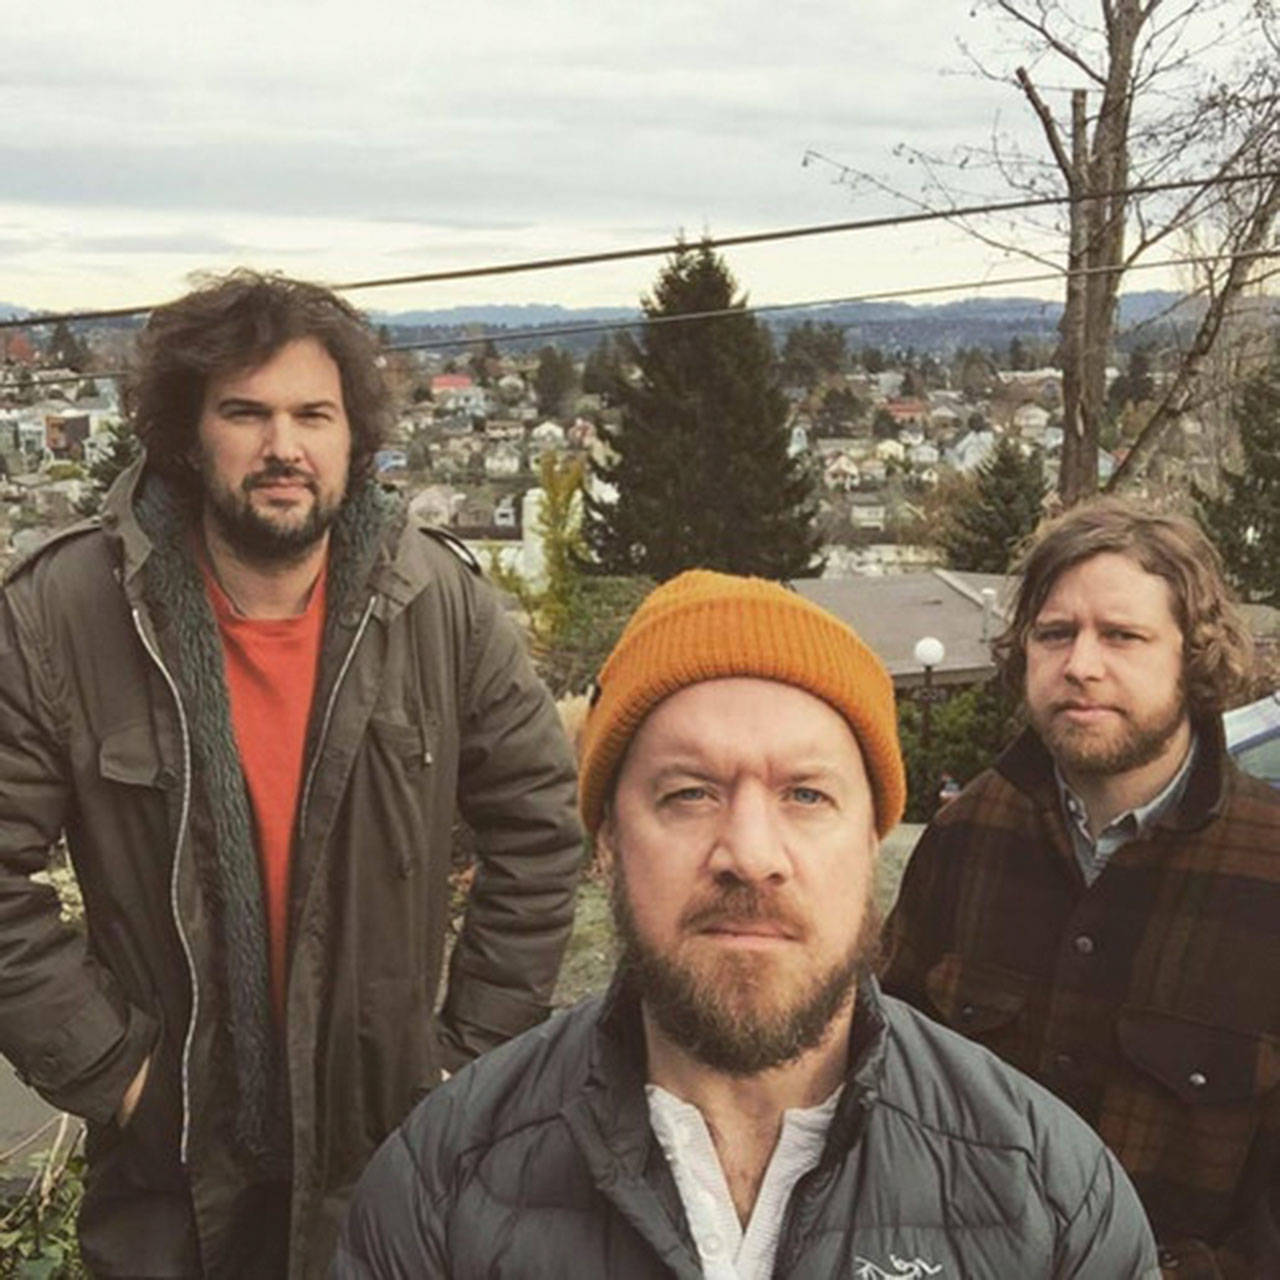 Image courtesy of the Treehouse Café | The Cave Singers will perform at the Treehouse Café at 8 p.m. Friday, Dec. 7.